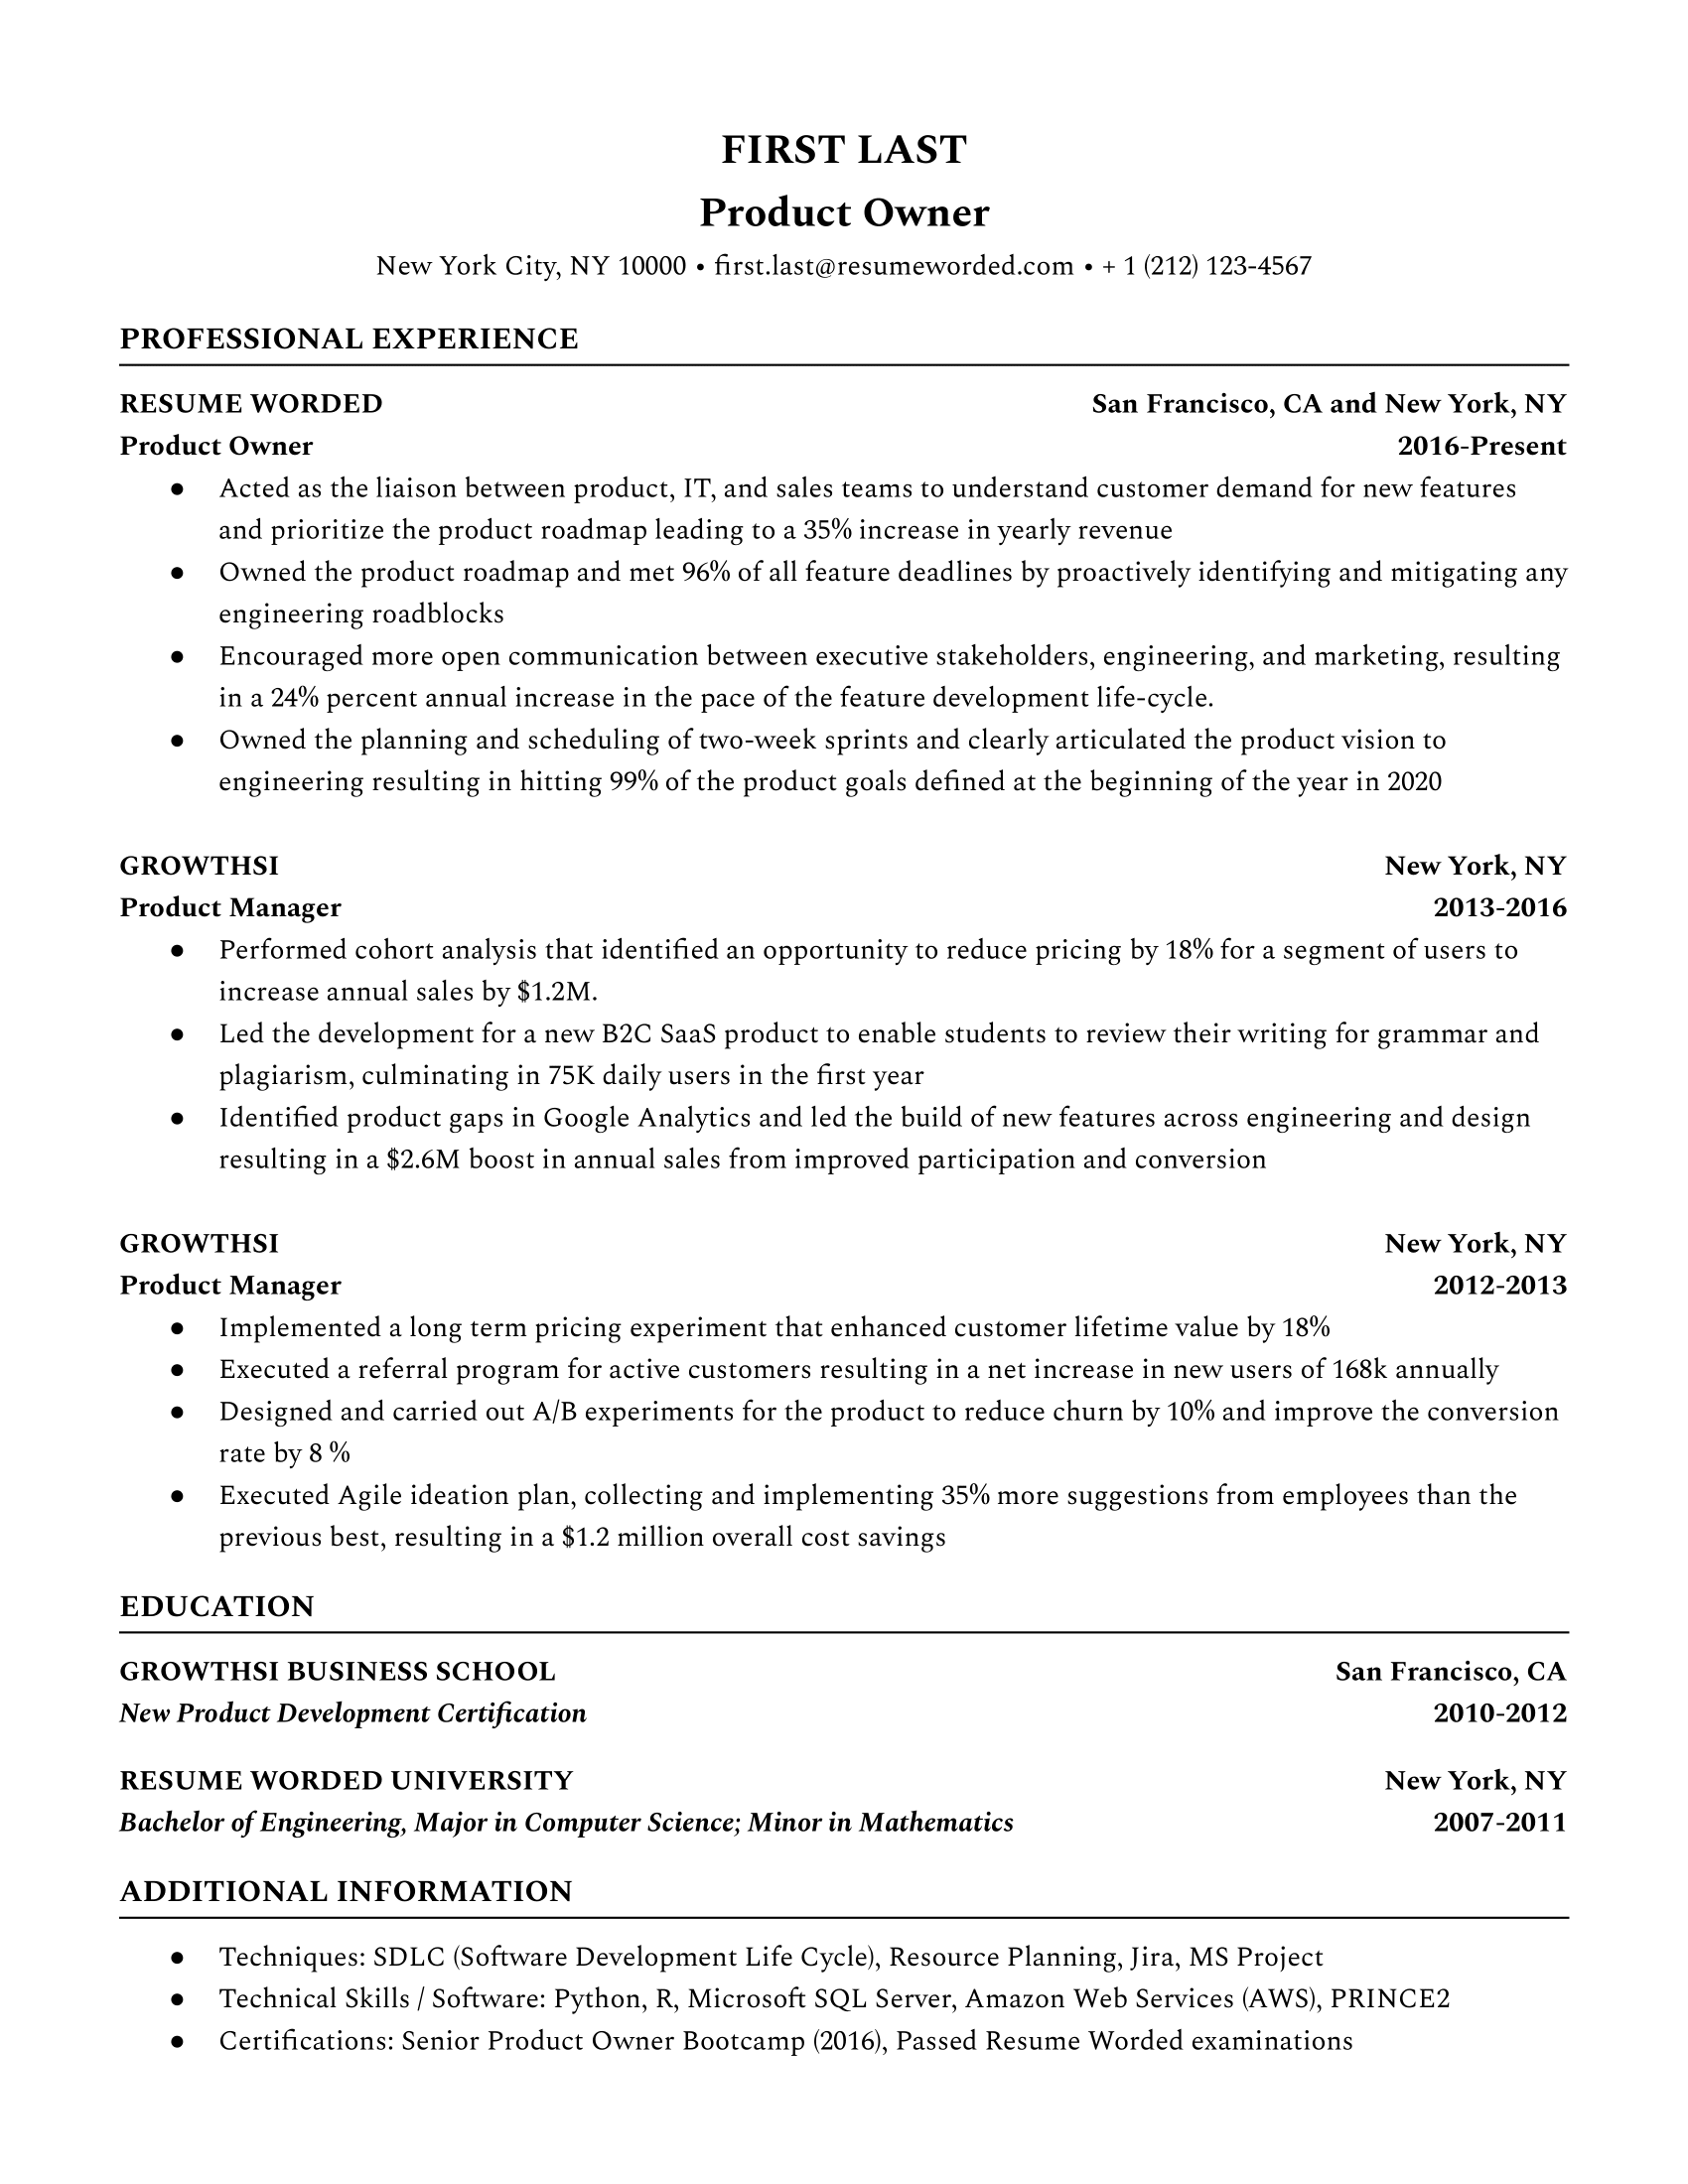 Product owner resume template example using strong action verbs to highlight hard and soft skills